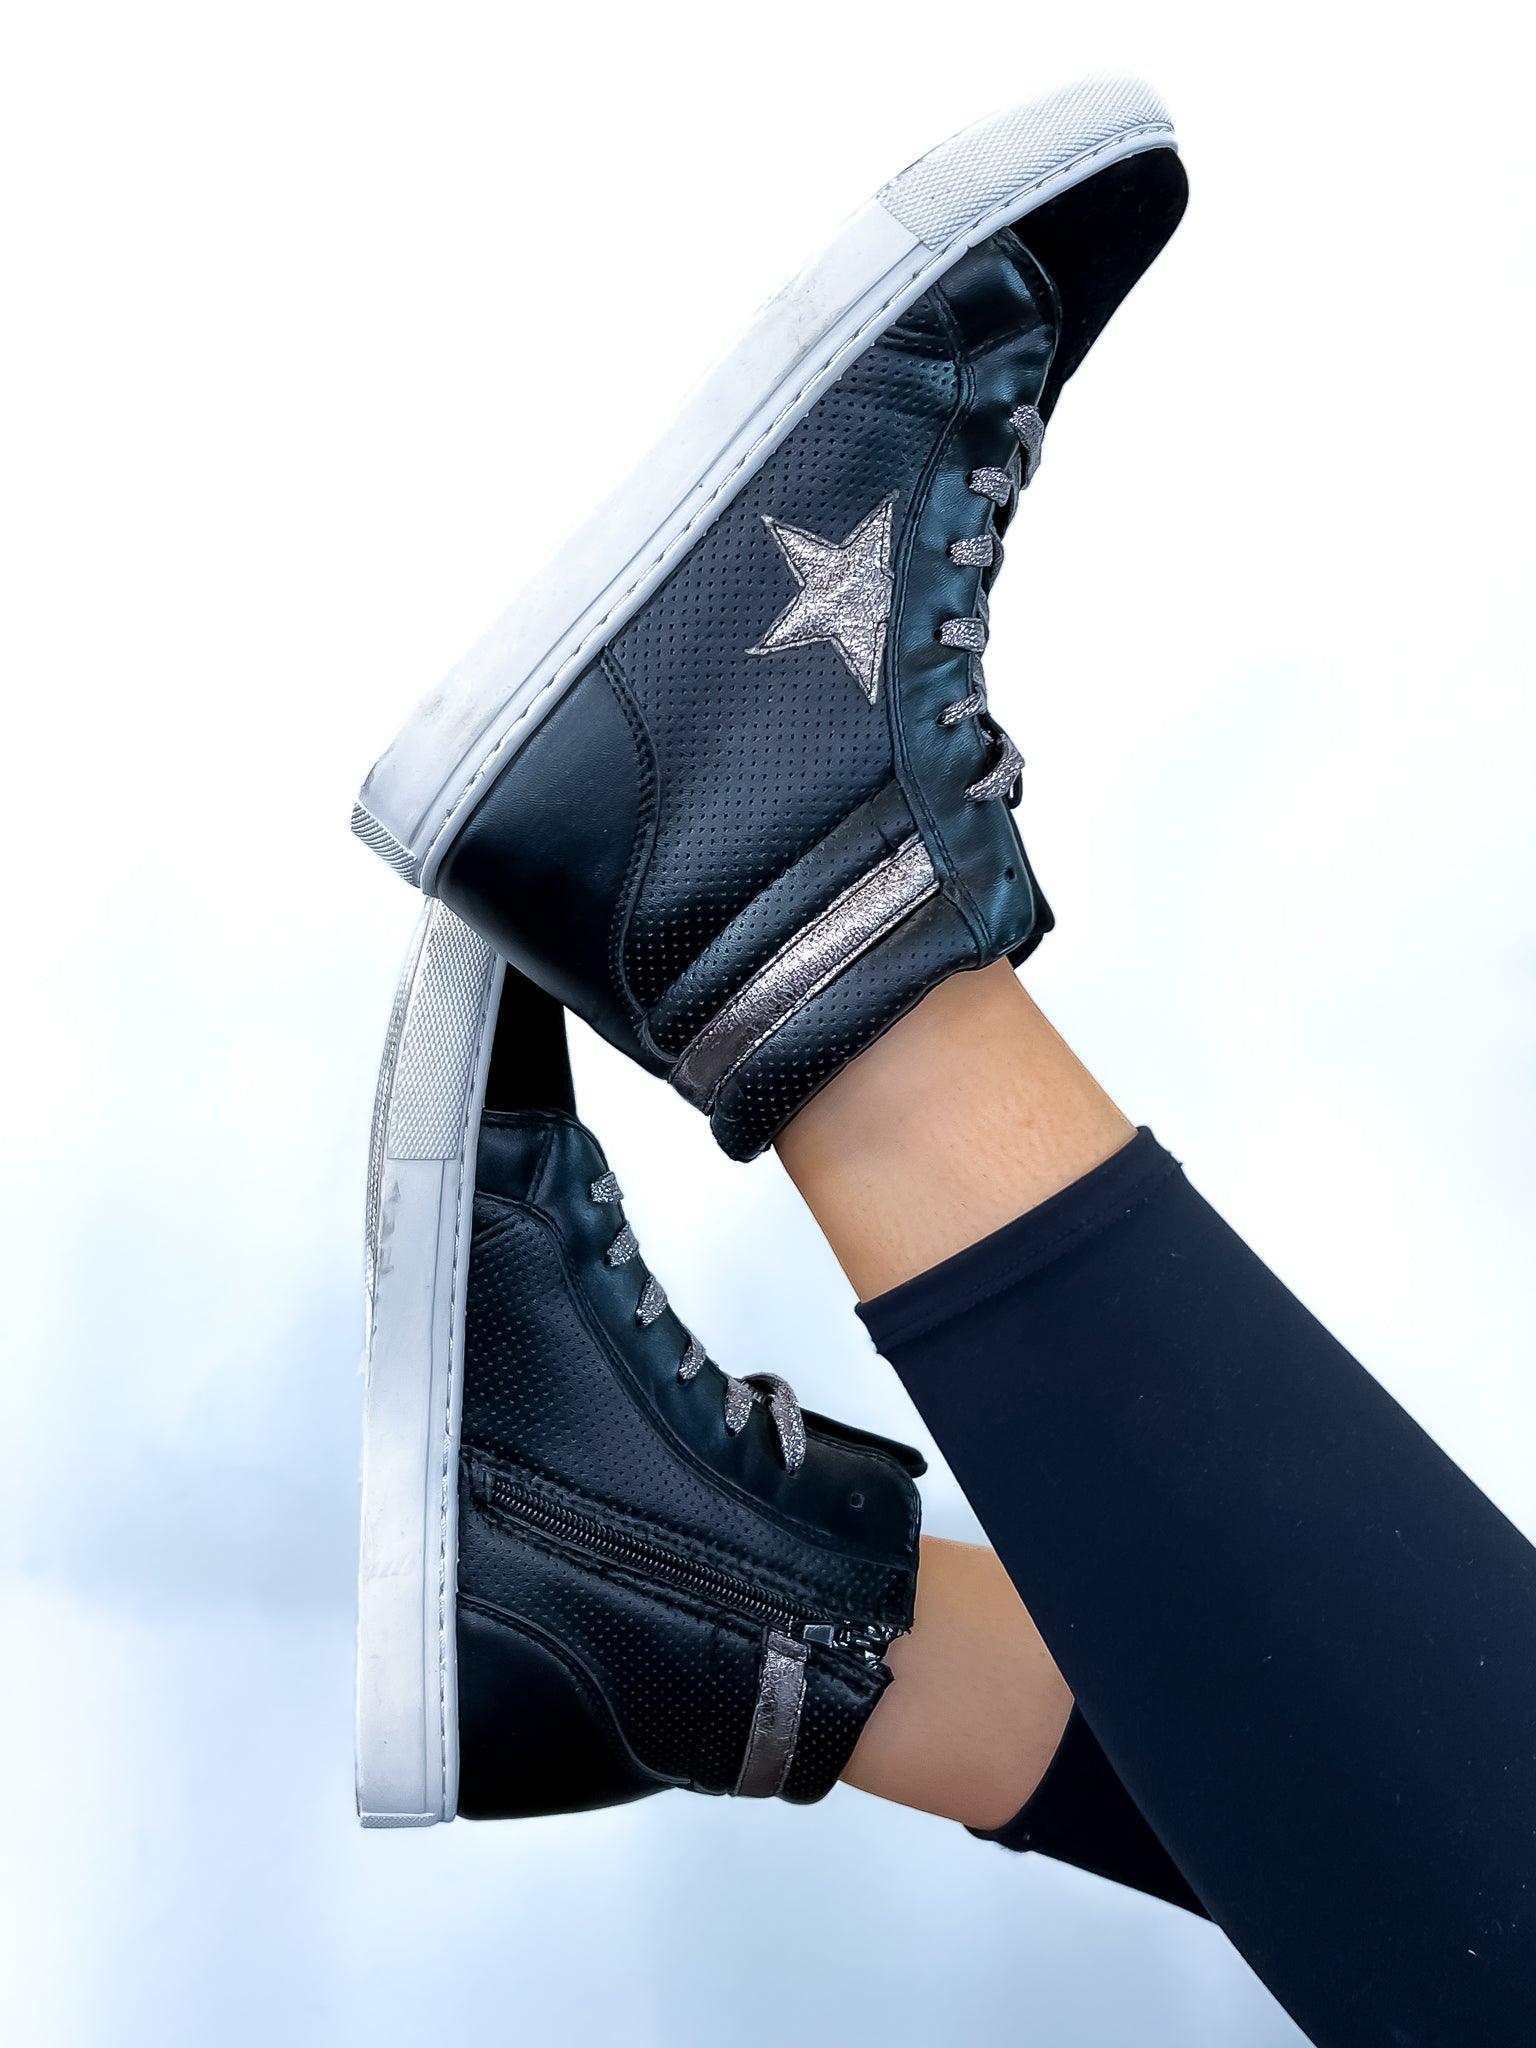 Fast Star High Top Sneakers - The ZigZag Stripe